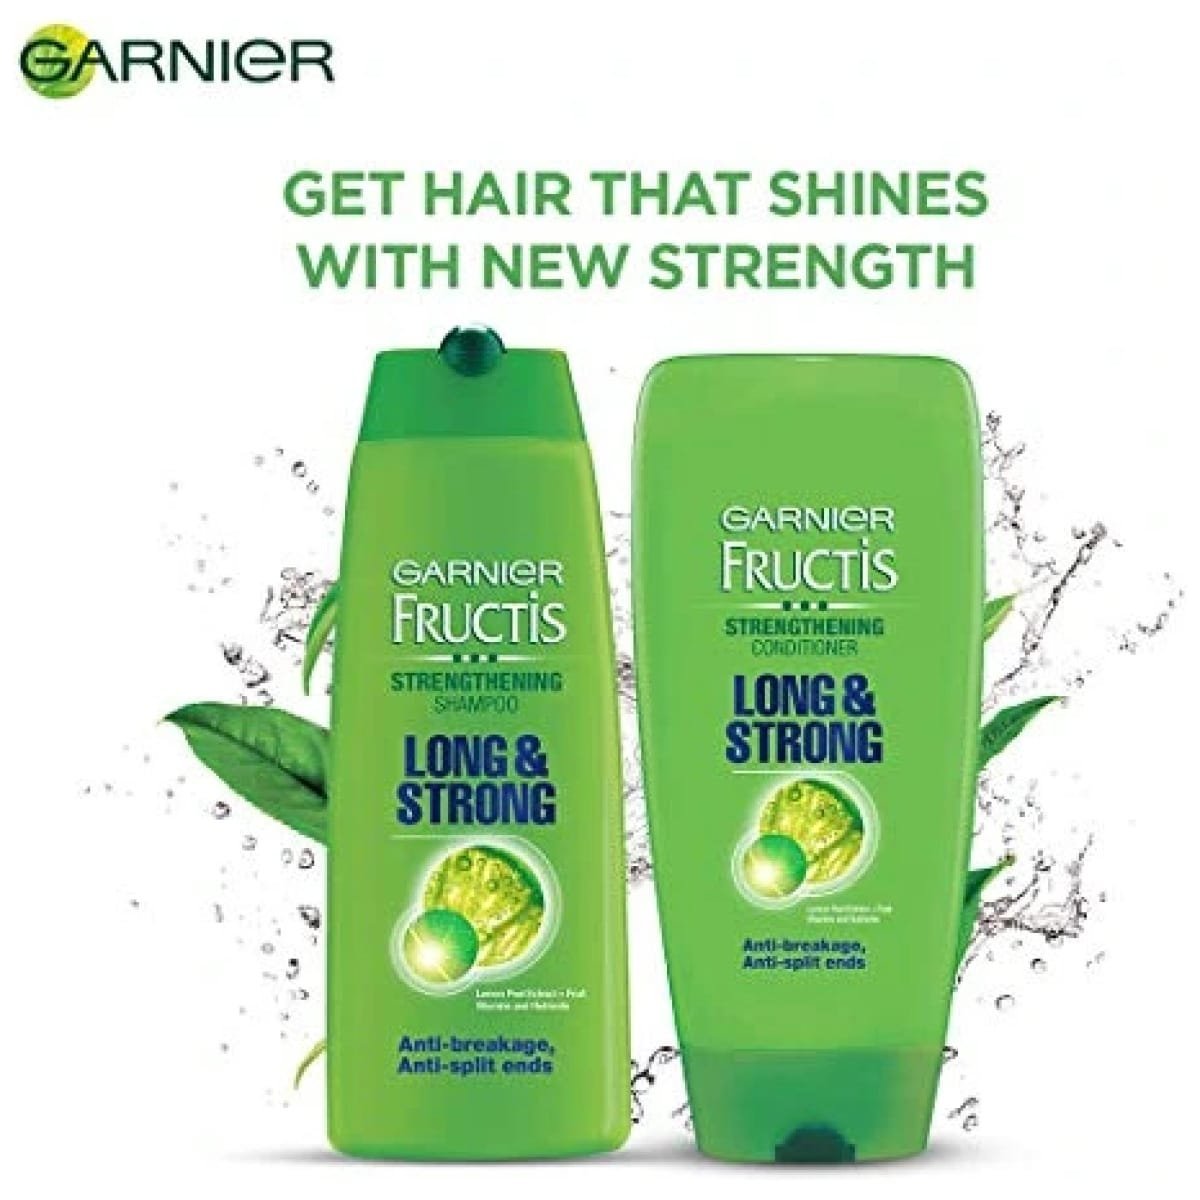 This shampGarnier Fructis Long and Strong Strengthening Shampoo 340mloo nourishes hair from the root, right down to the tip.